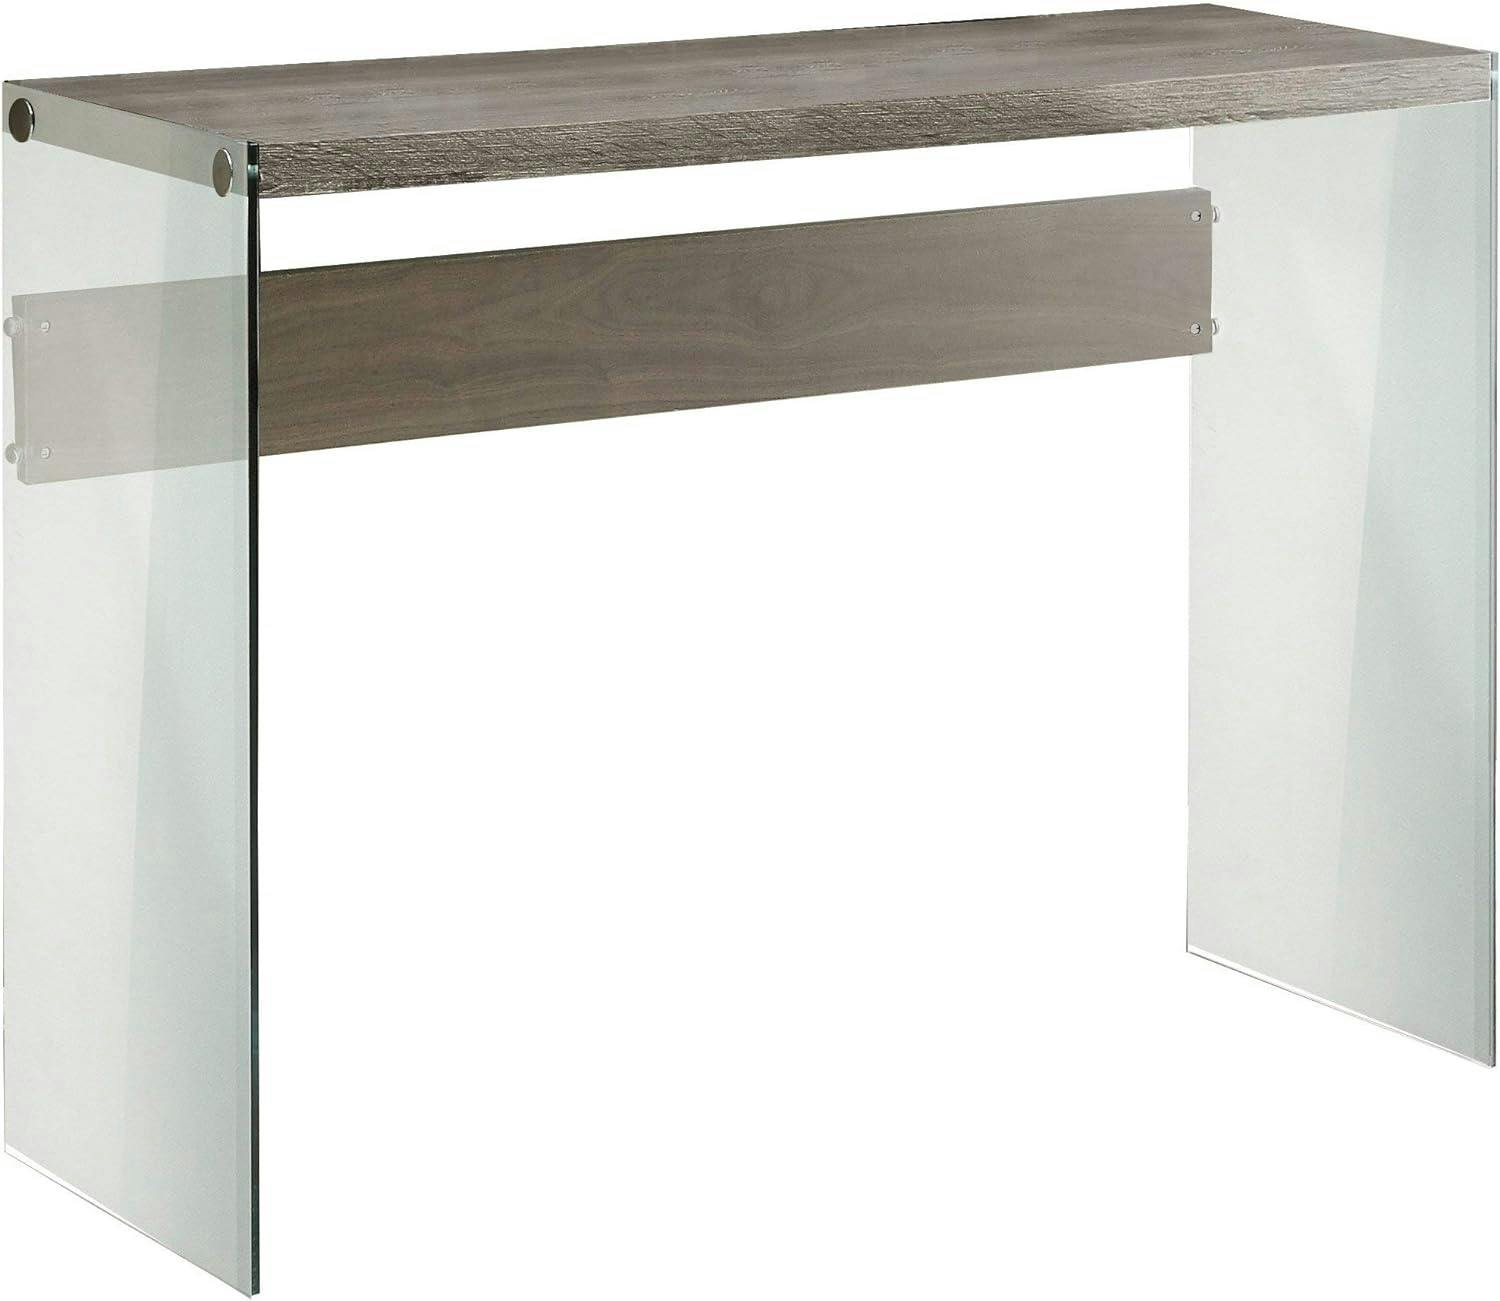 Contemporary Dark Taupe 44" Glass-Top Console Table with Chrome Legs